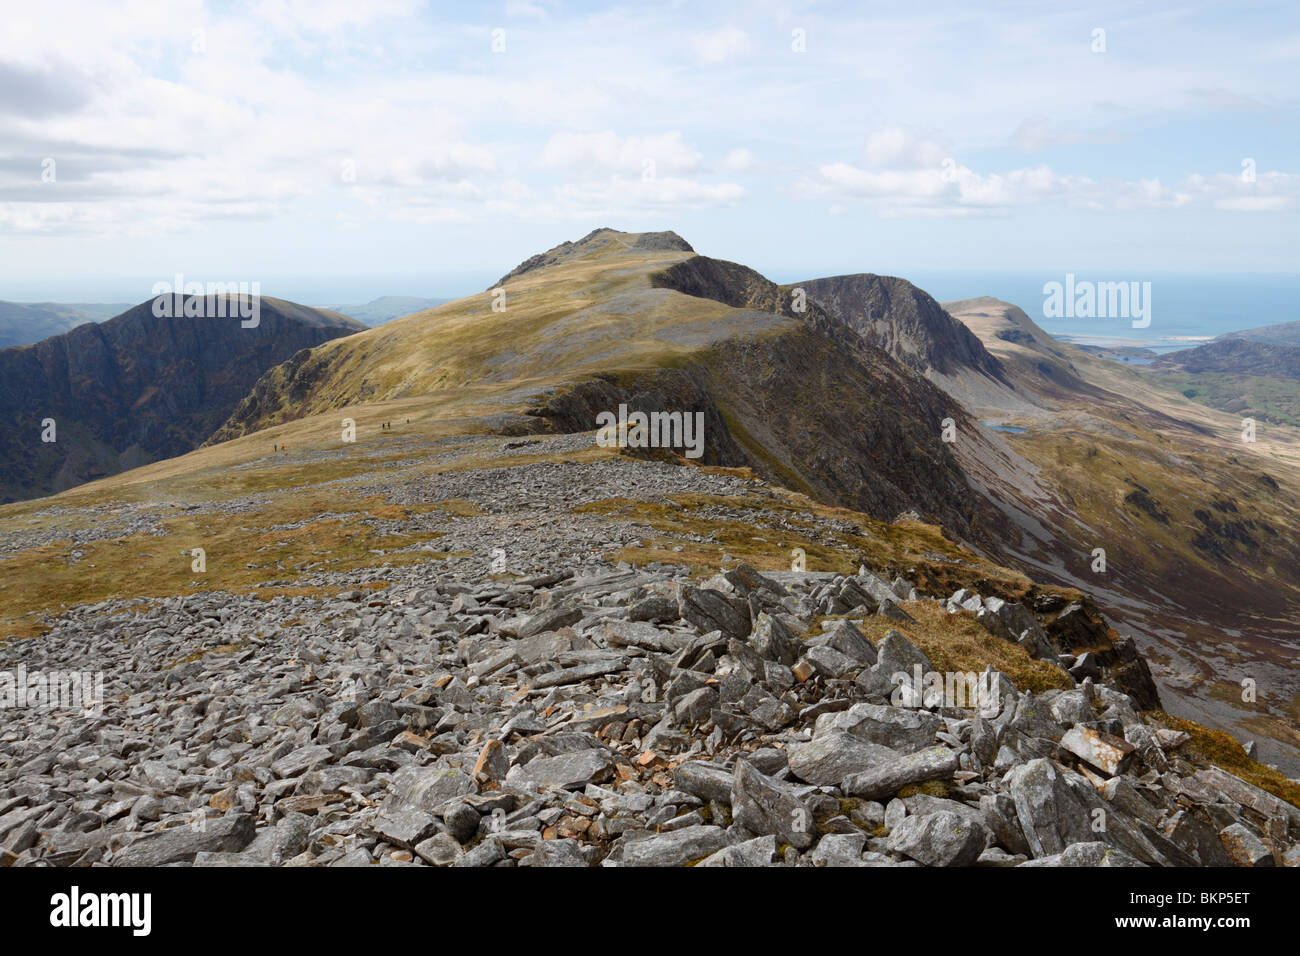 The view to the summit of Cadair Idris, Penygadair, from the neighbouring summit of Mynydd Moel Stock Photo